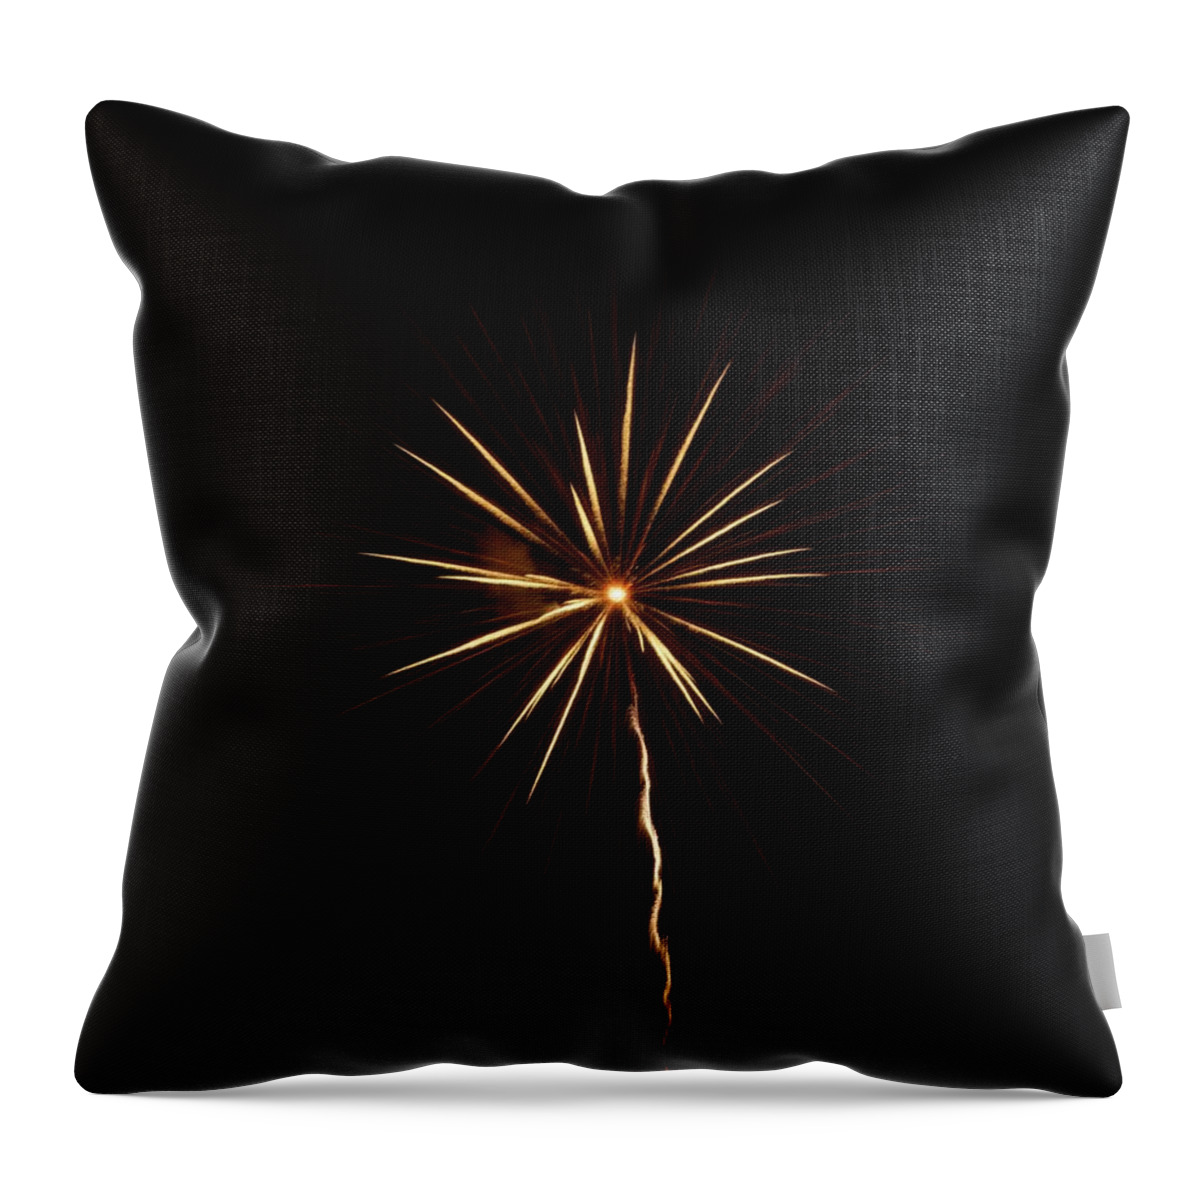 Firework Display Throw Pillow featuring the photograph Spreading Fireworks by By Hisuihane